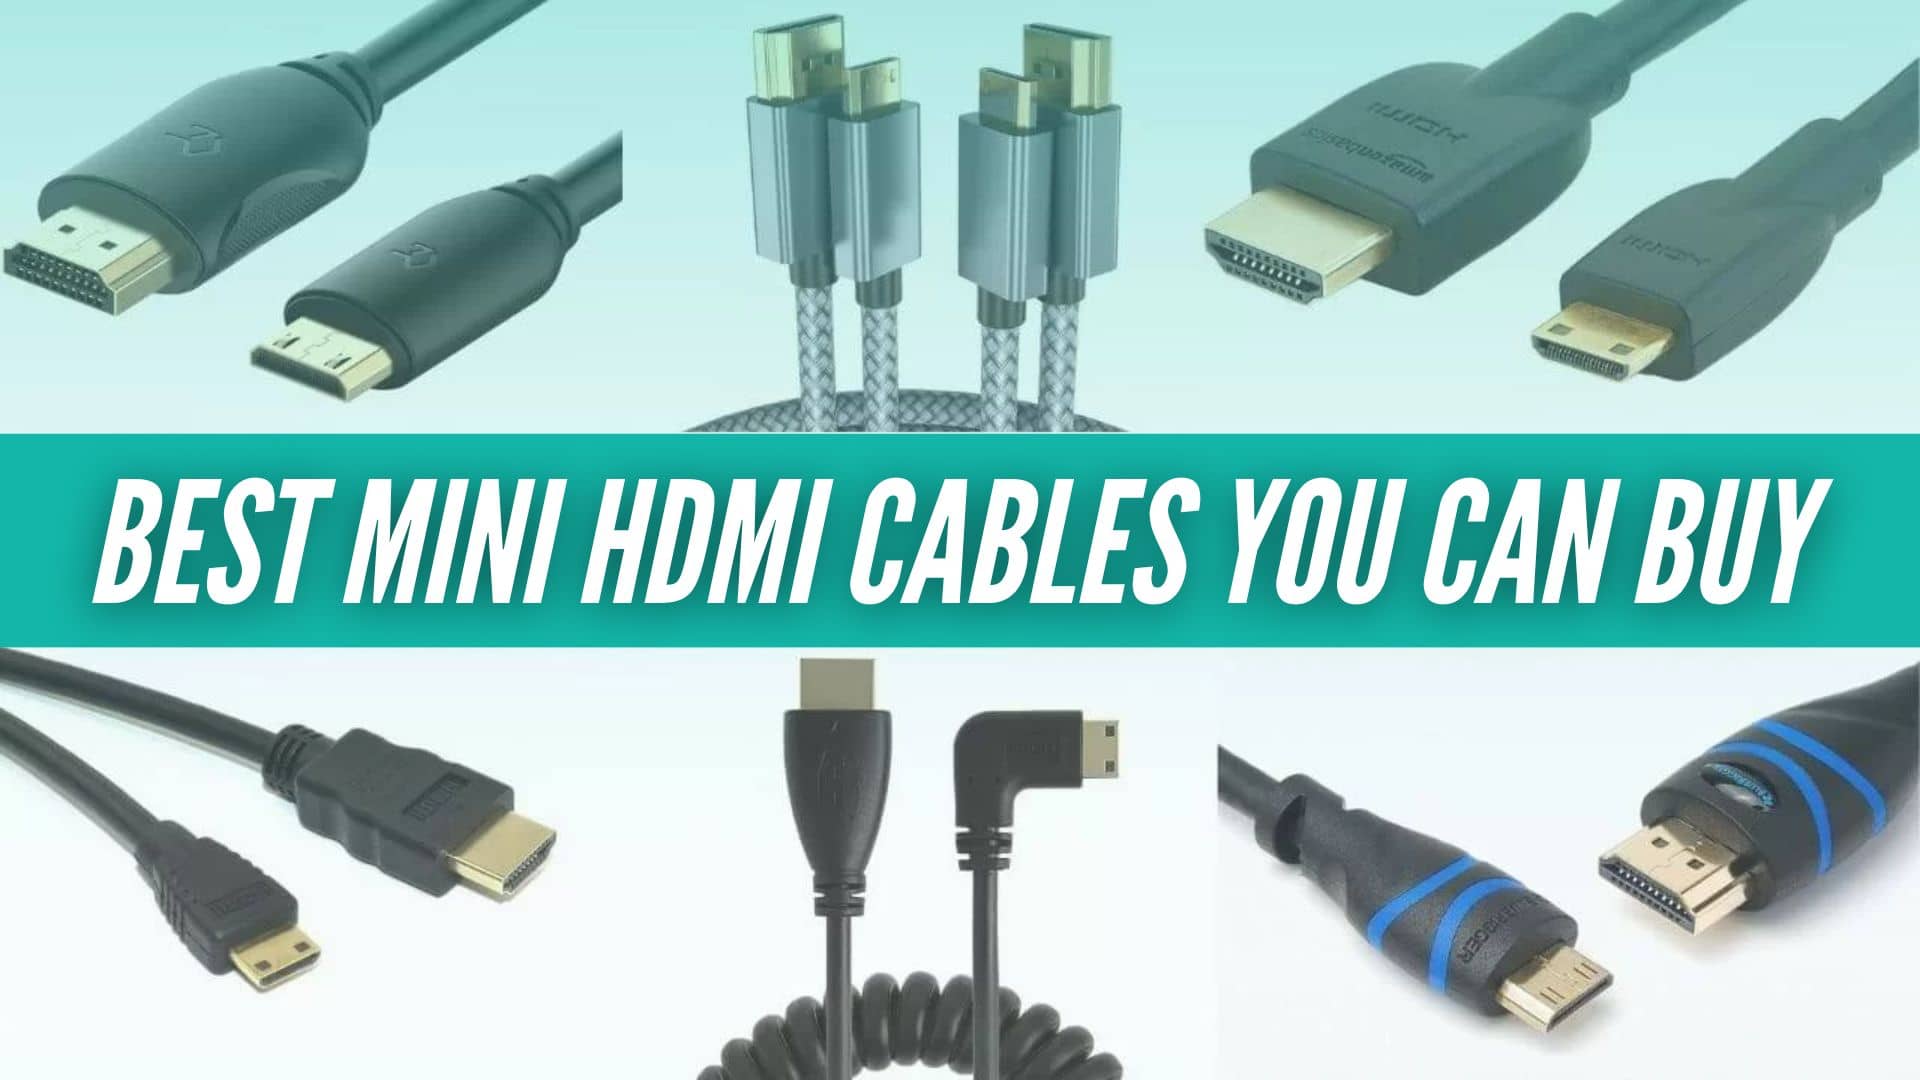 The 13 Best Mini HDMI cables to buy in 2023 [Buying Guide]